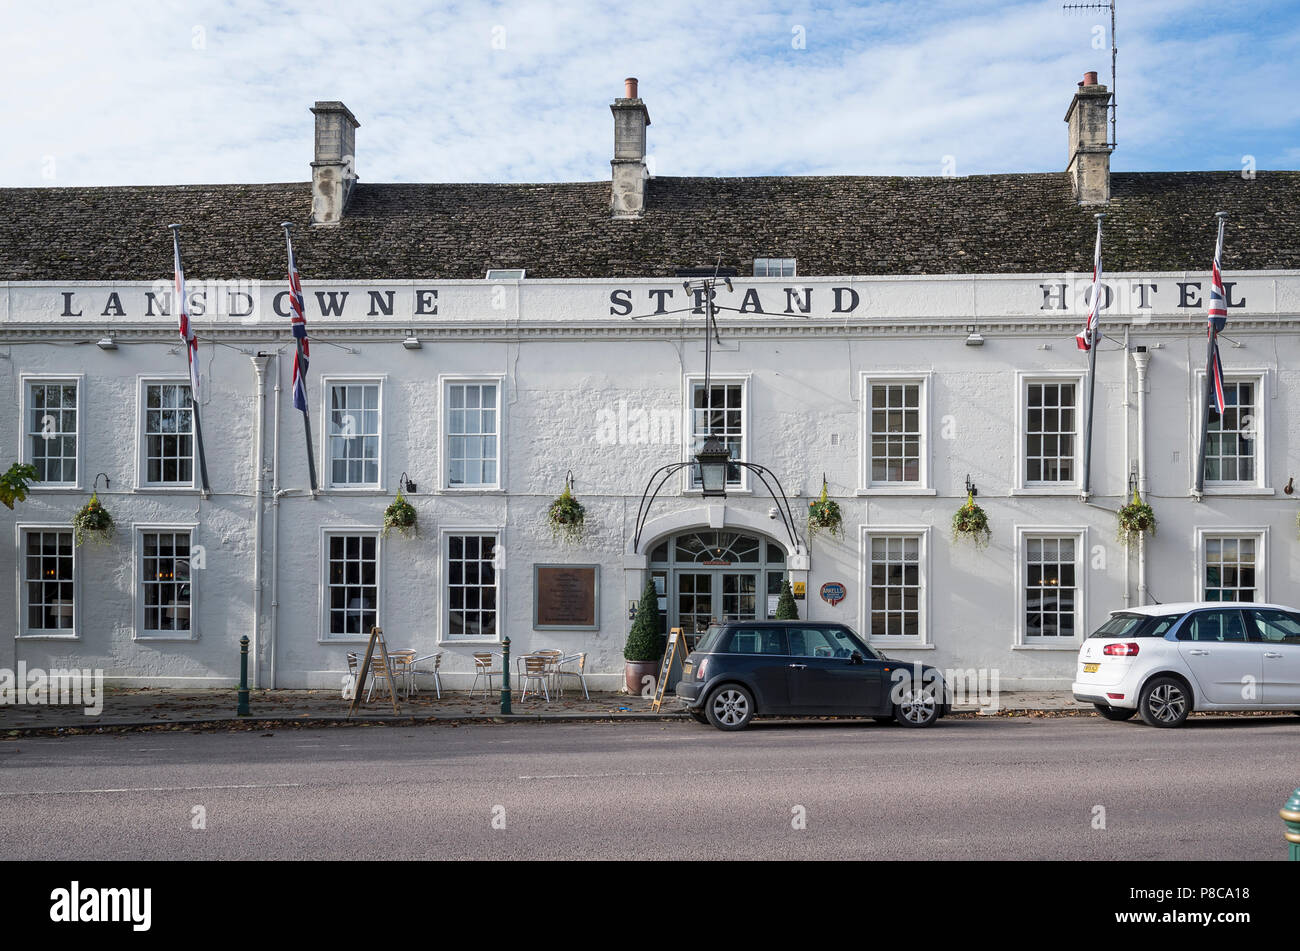 Front of the Lansdowne Strand hotel in Calne Wiltshire England UK Stock Photo